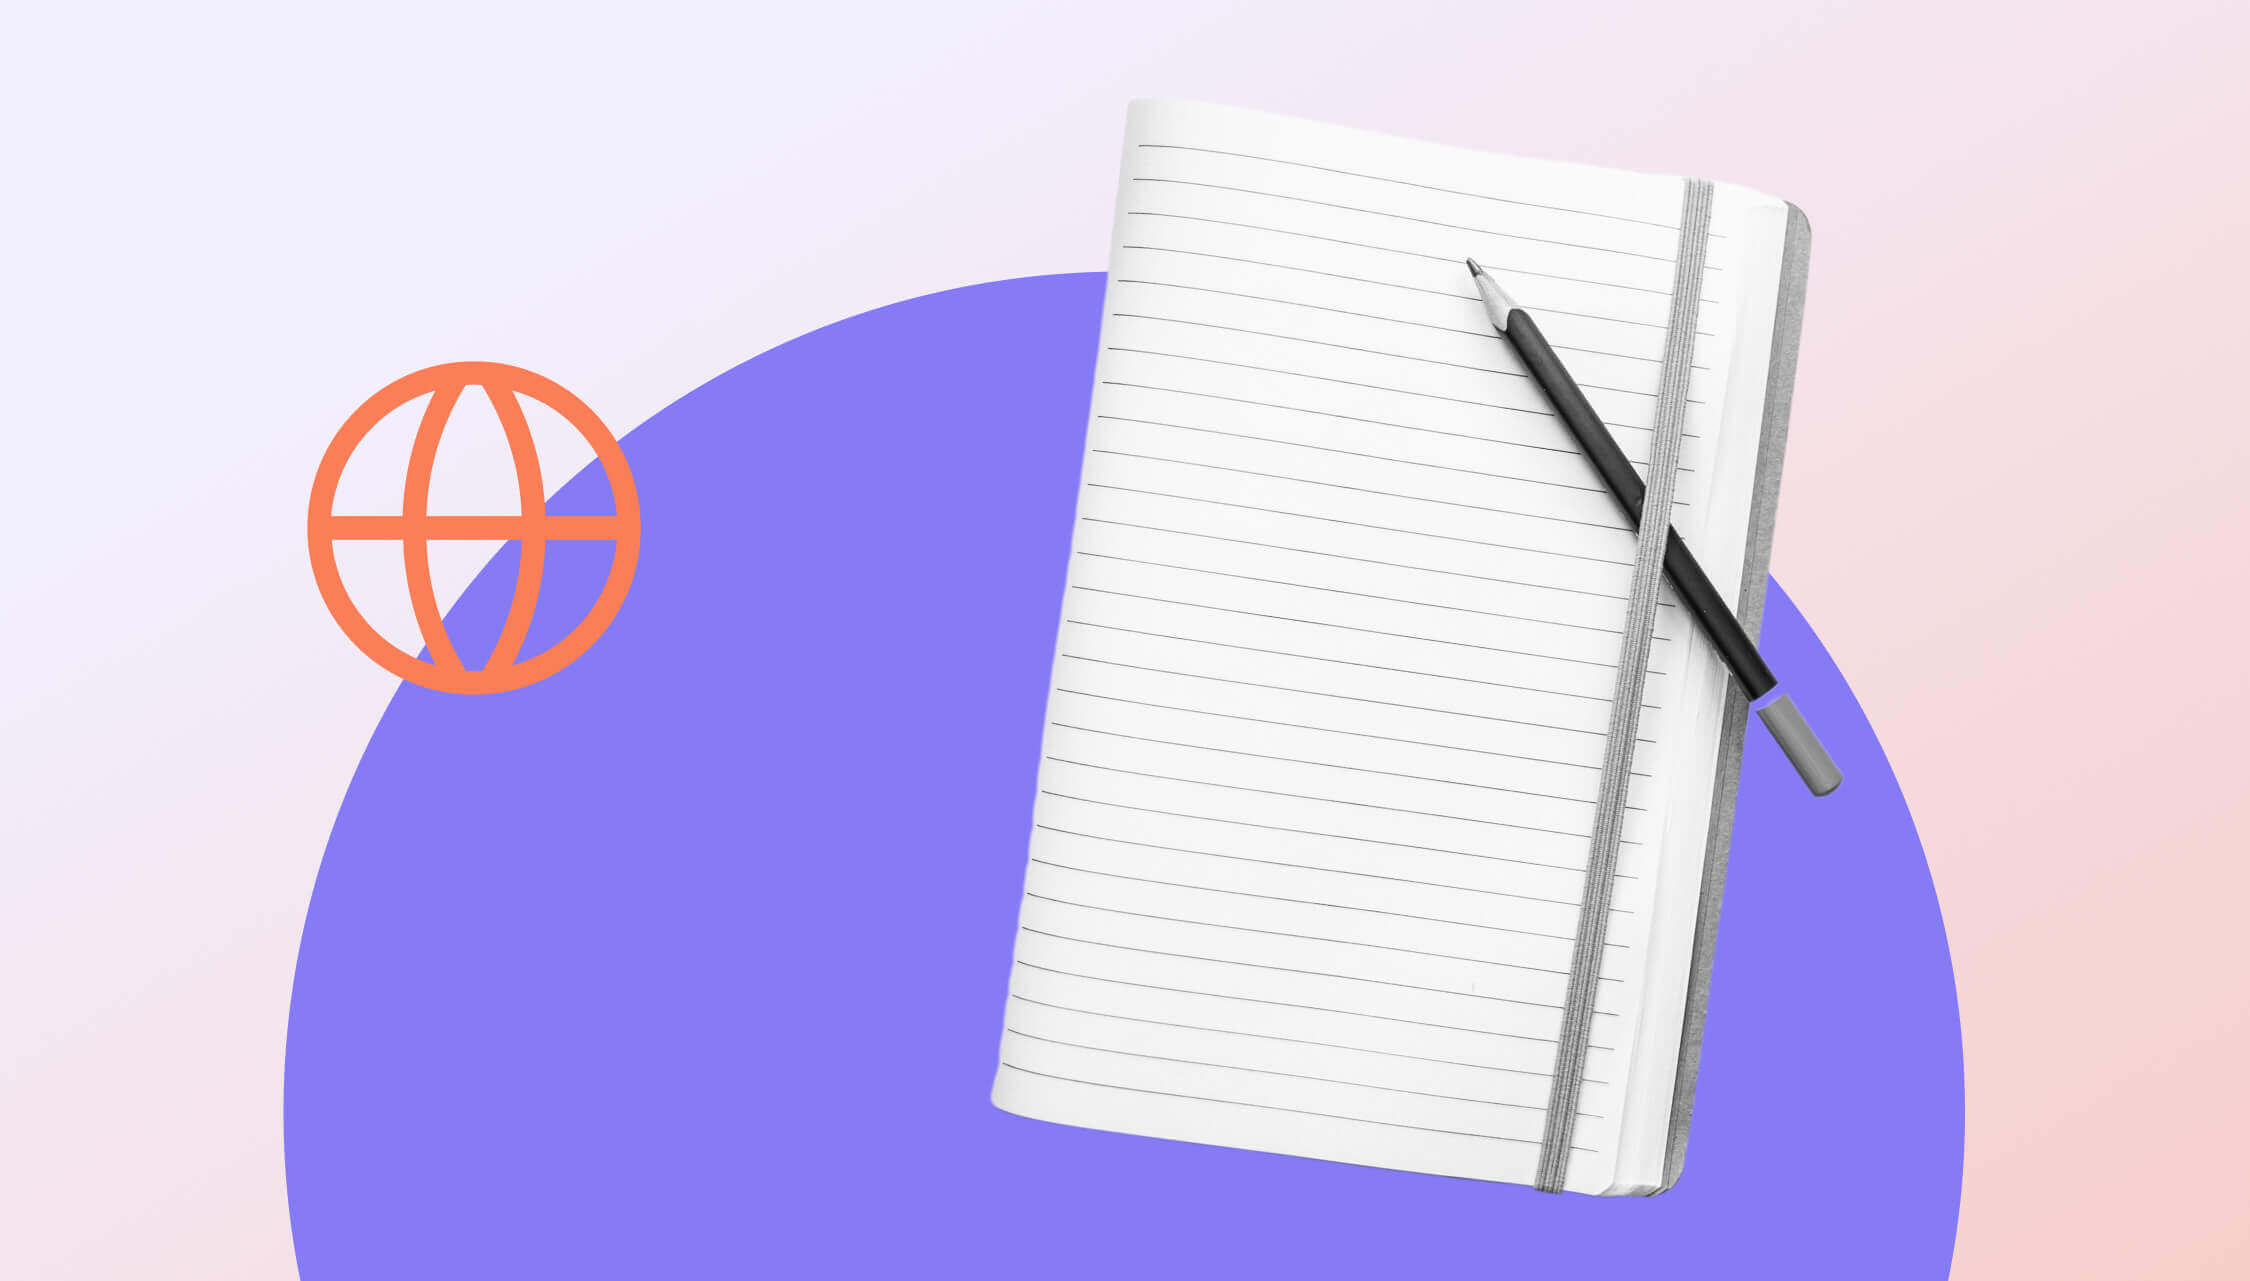 This picture shows a blank page of a notebook with a pen. It signals the start of thinking about a suitable SEO strategy for more domain authority and how to build it convergently.